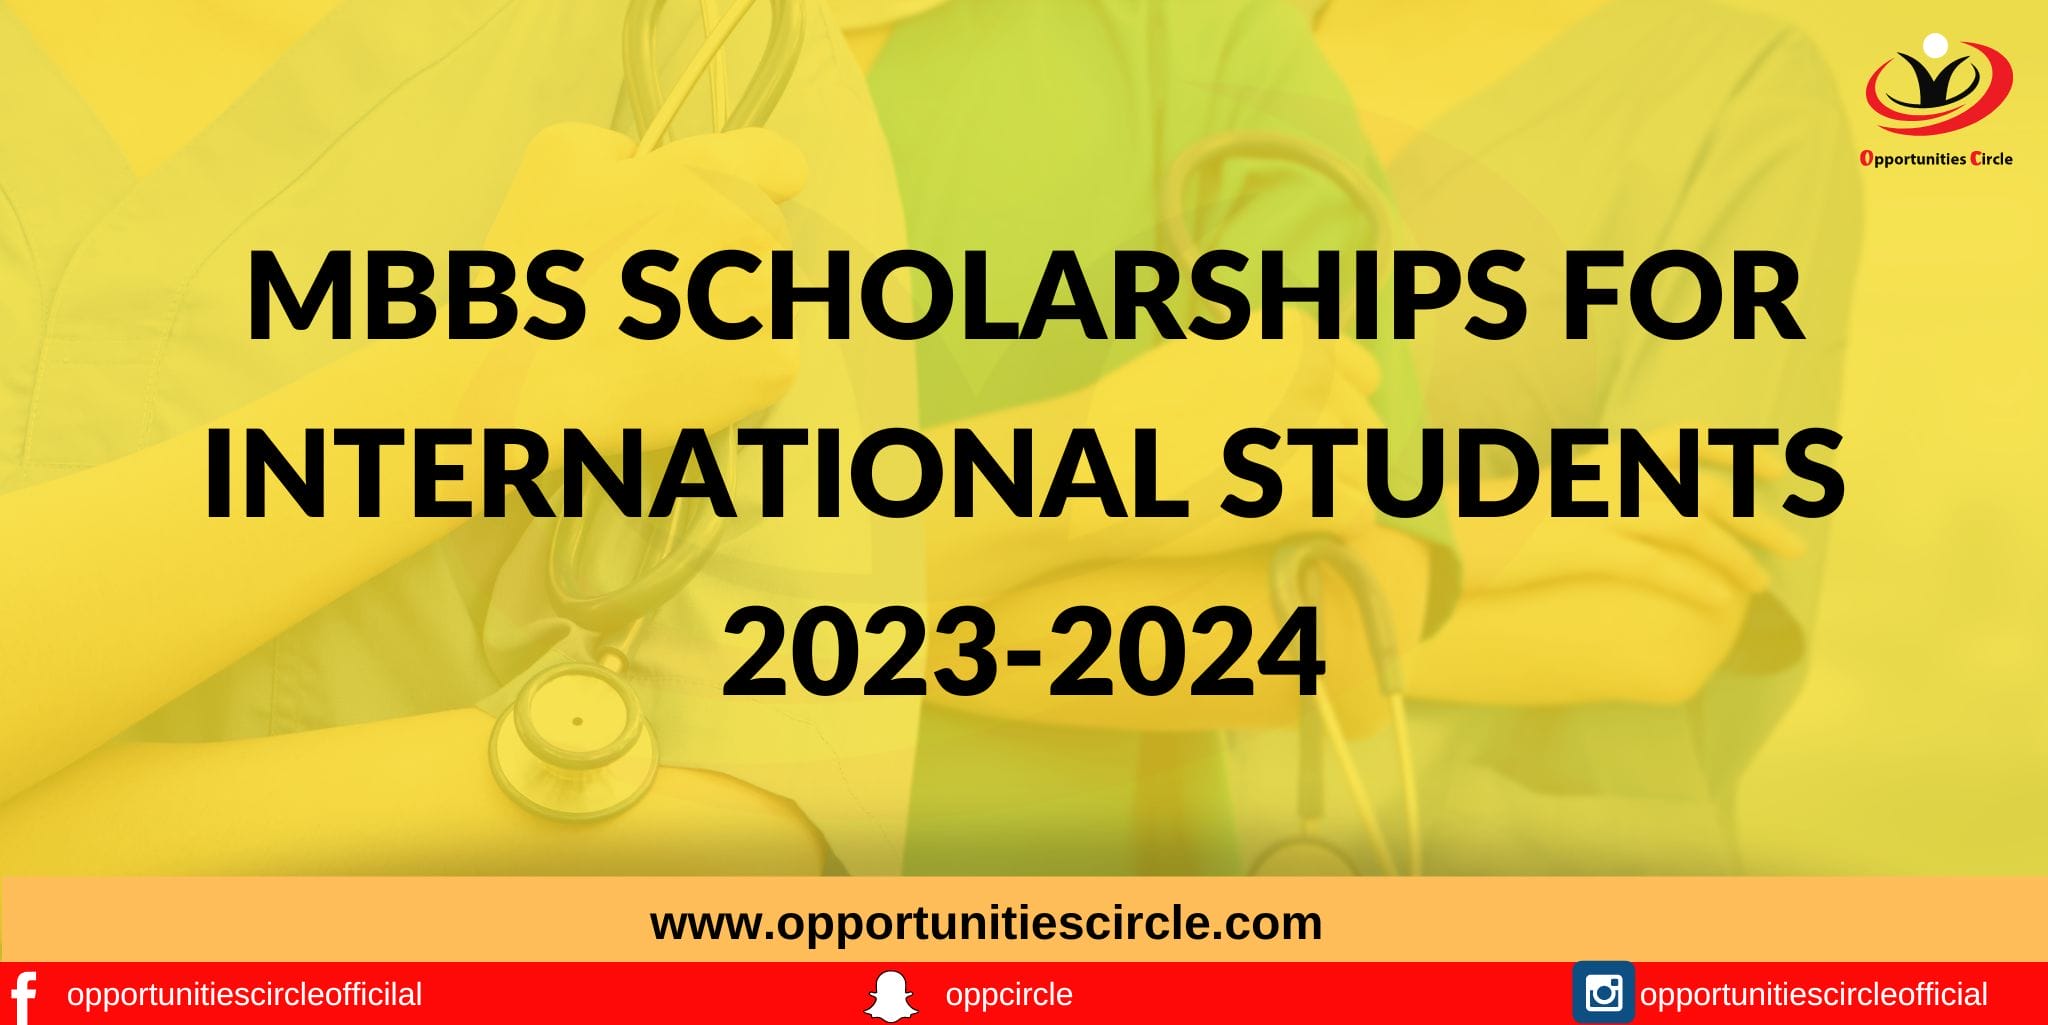 MBBS Scholarships for International Students 2023-2024 - Opportunities